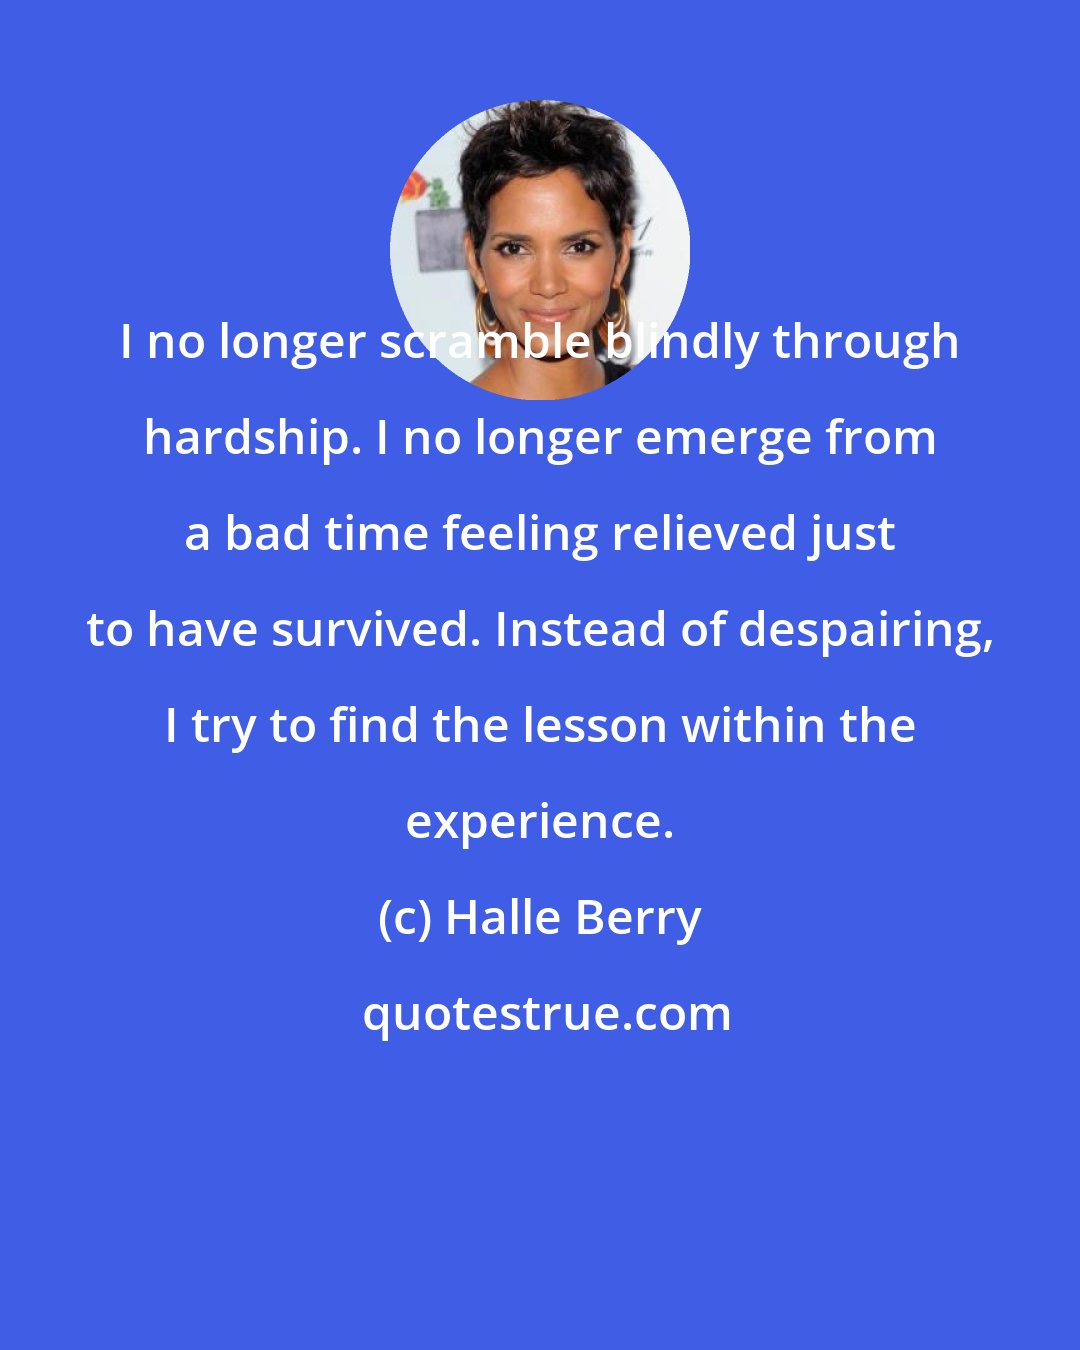 Halle Berry: I no longer scramble blindly through hardship. I no longer emerge from a bad time feeling relieved just to have survived. Instead of despairing, I try to find the lesson within the experience.